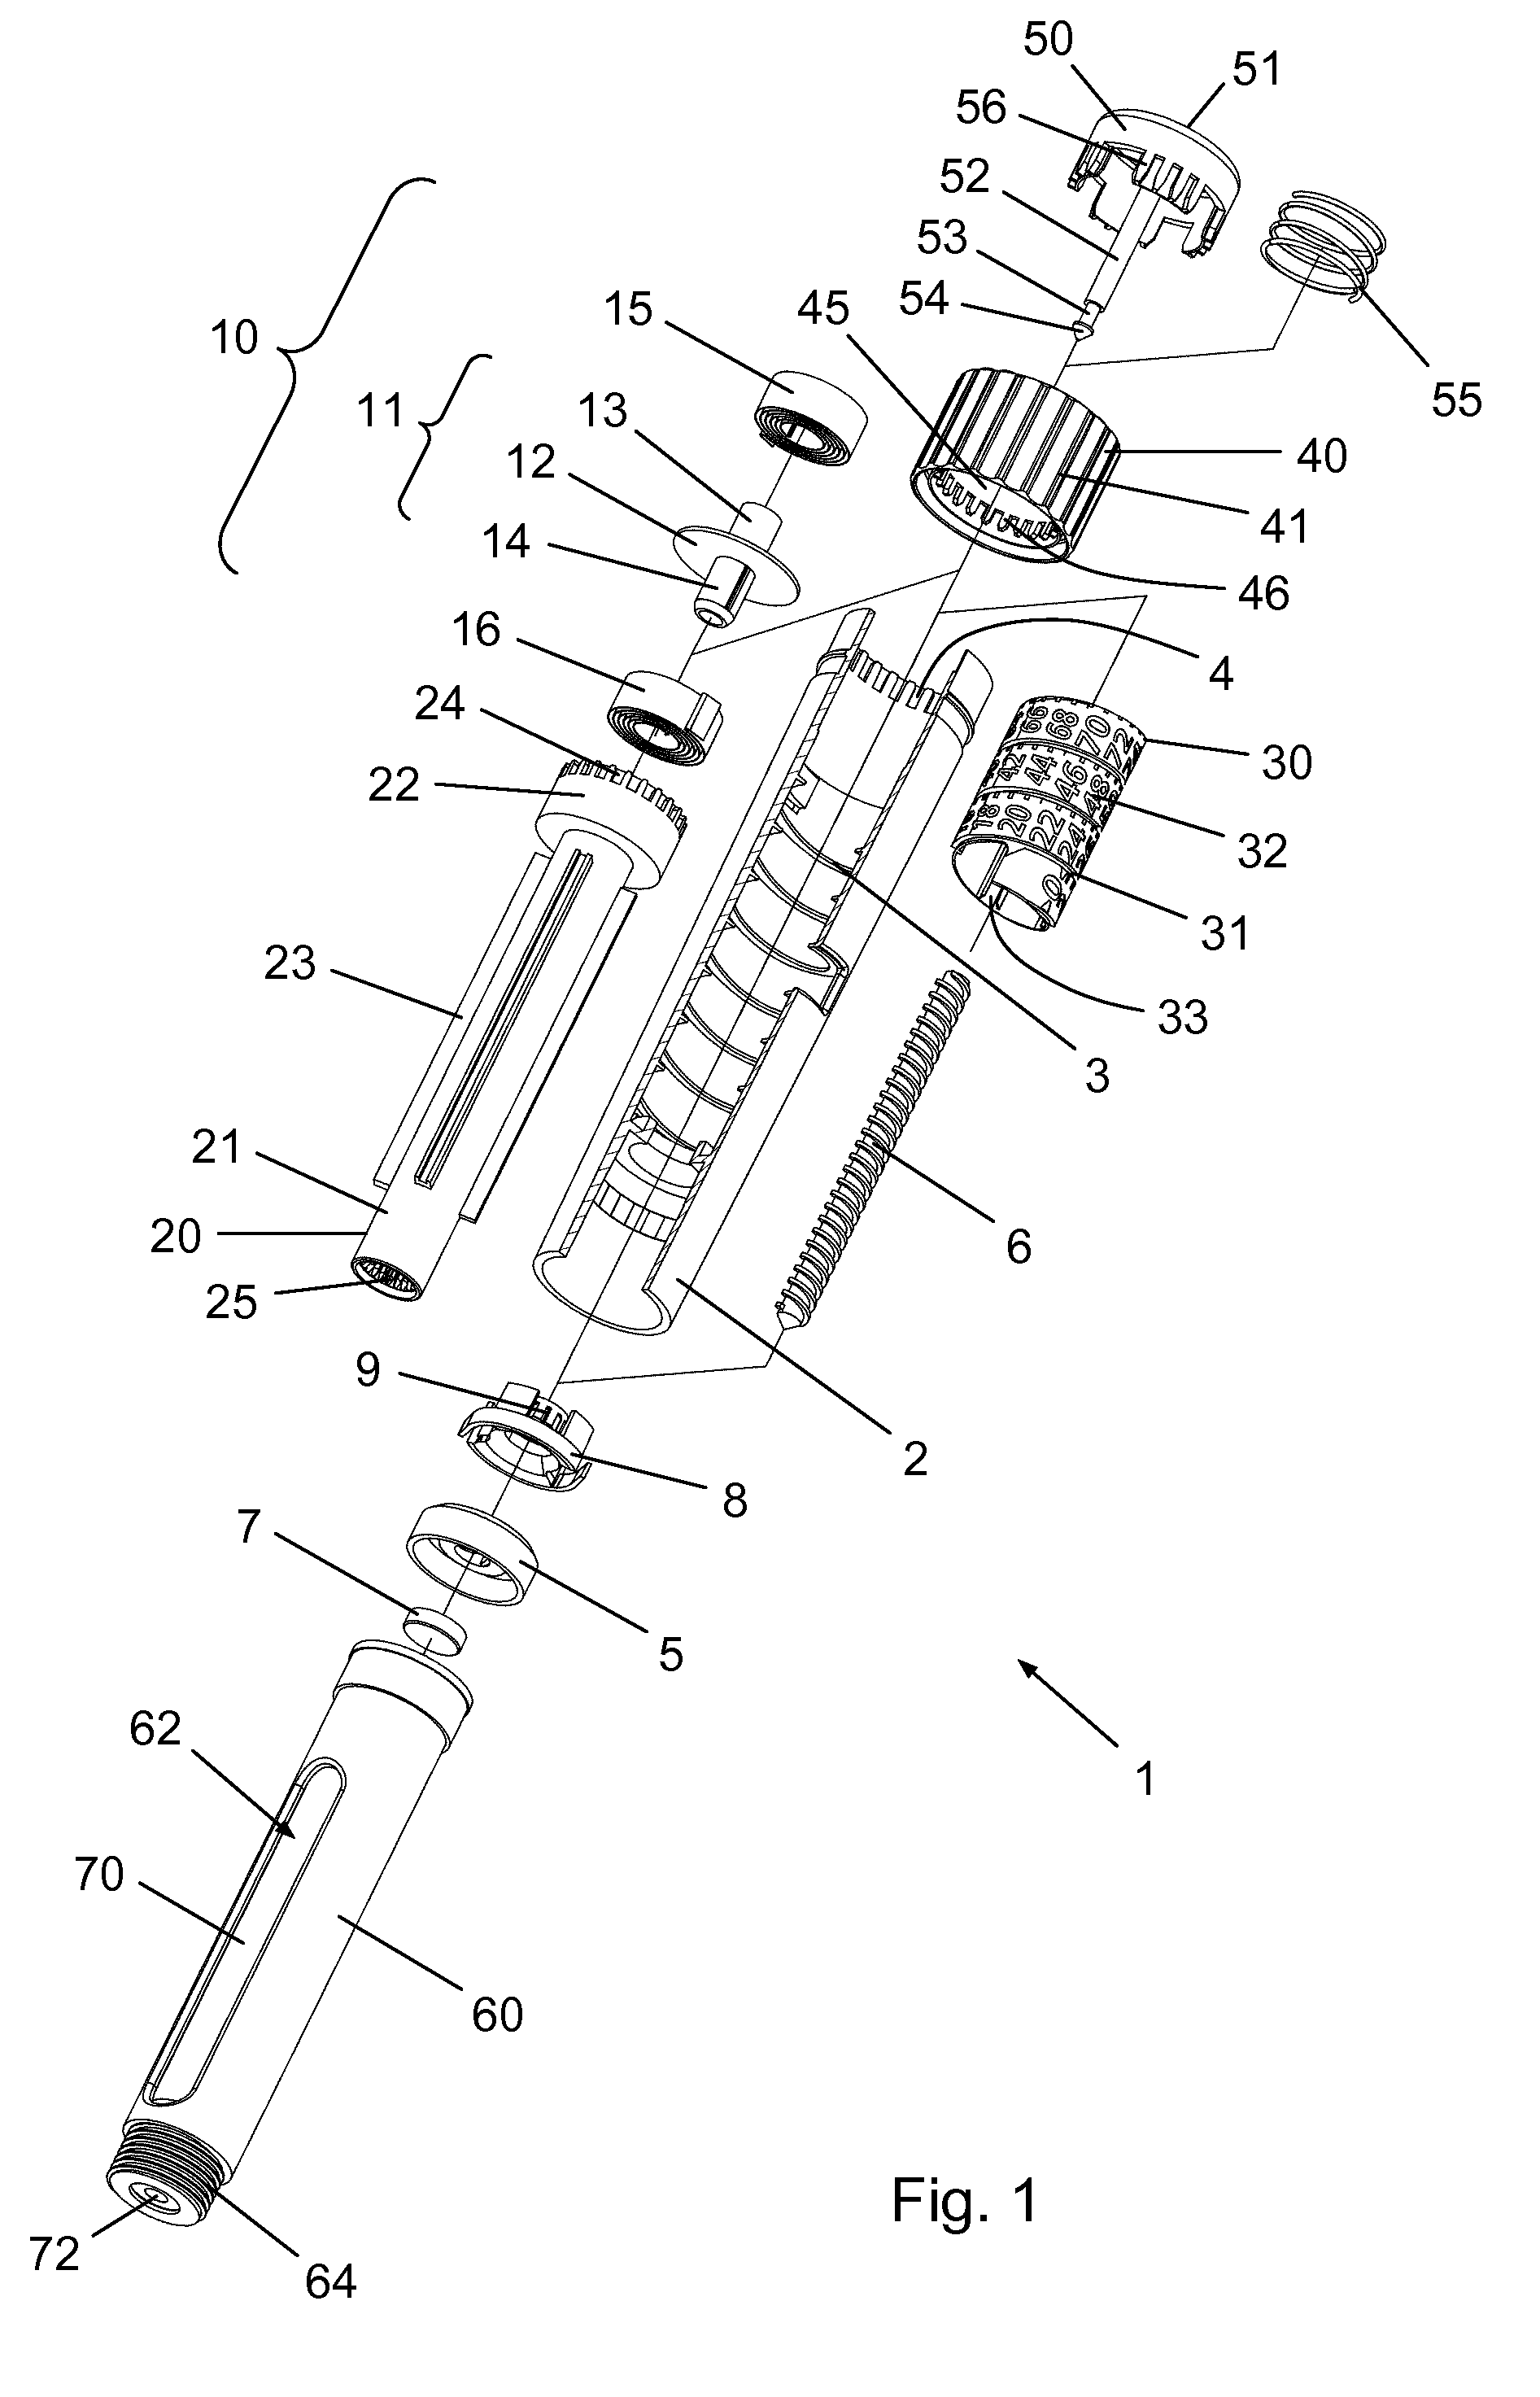 Drug Delivery Device with Compact Power Unit